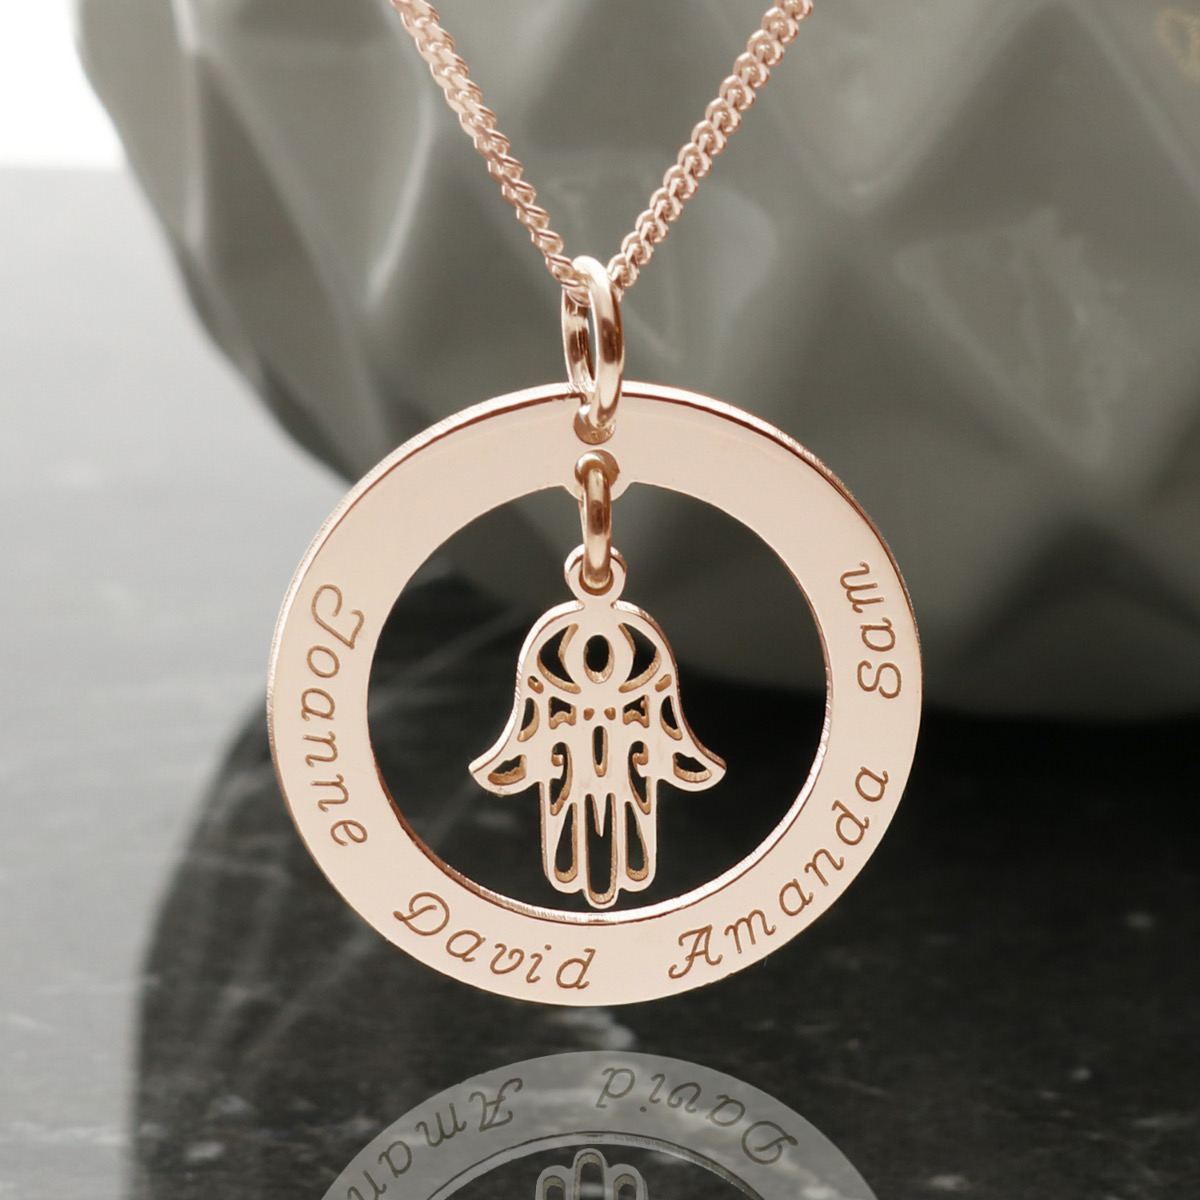 9ct Rose Gold Plated Personalised Disc With Hanging Hamsa Hand Of Fatima Pendant Necklace